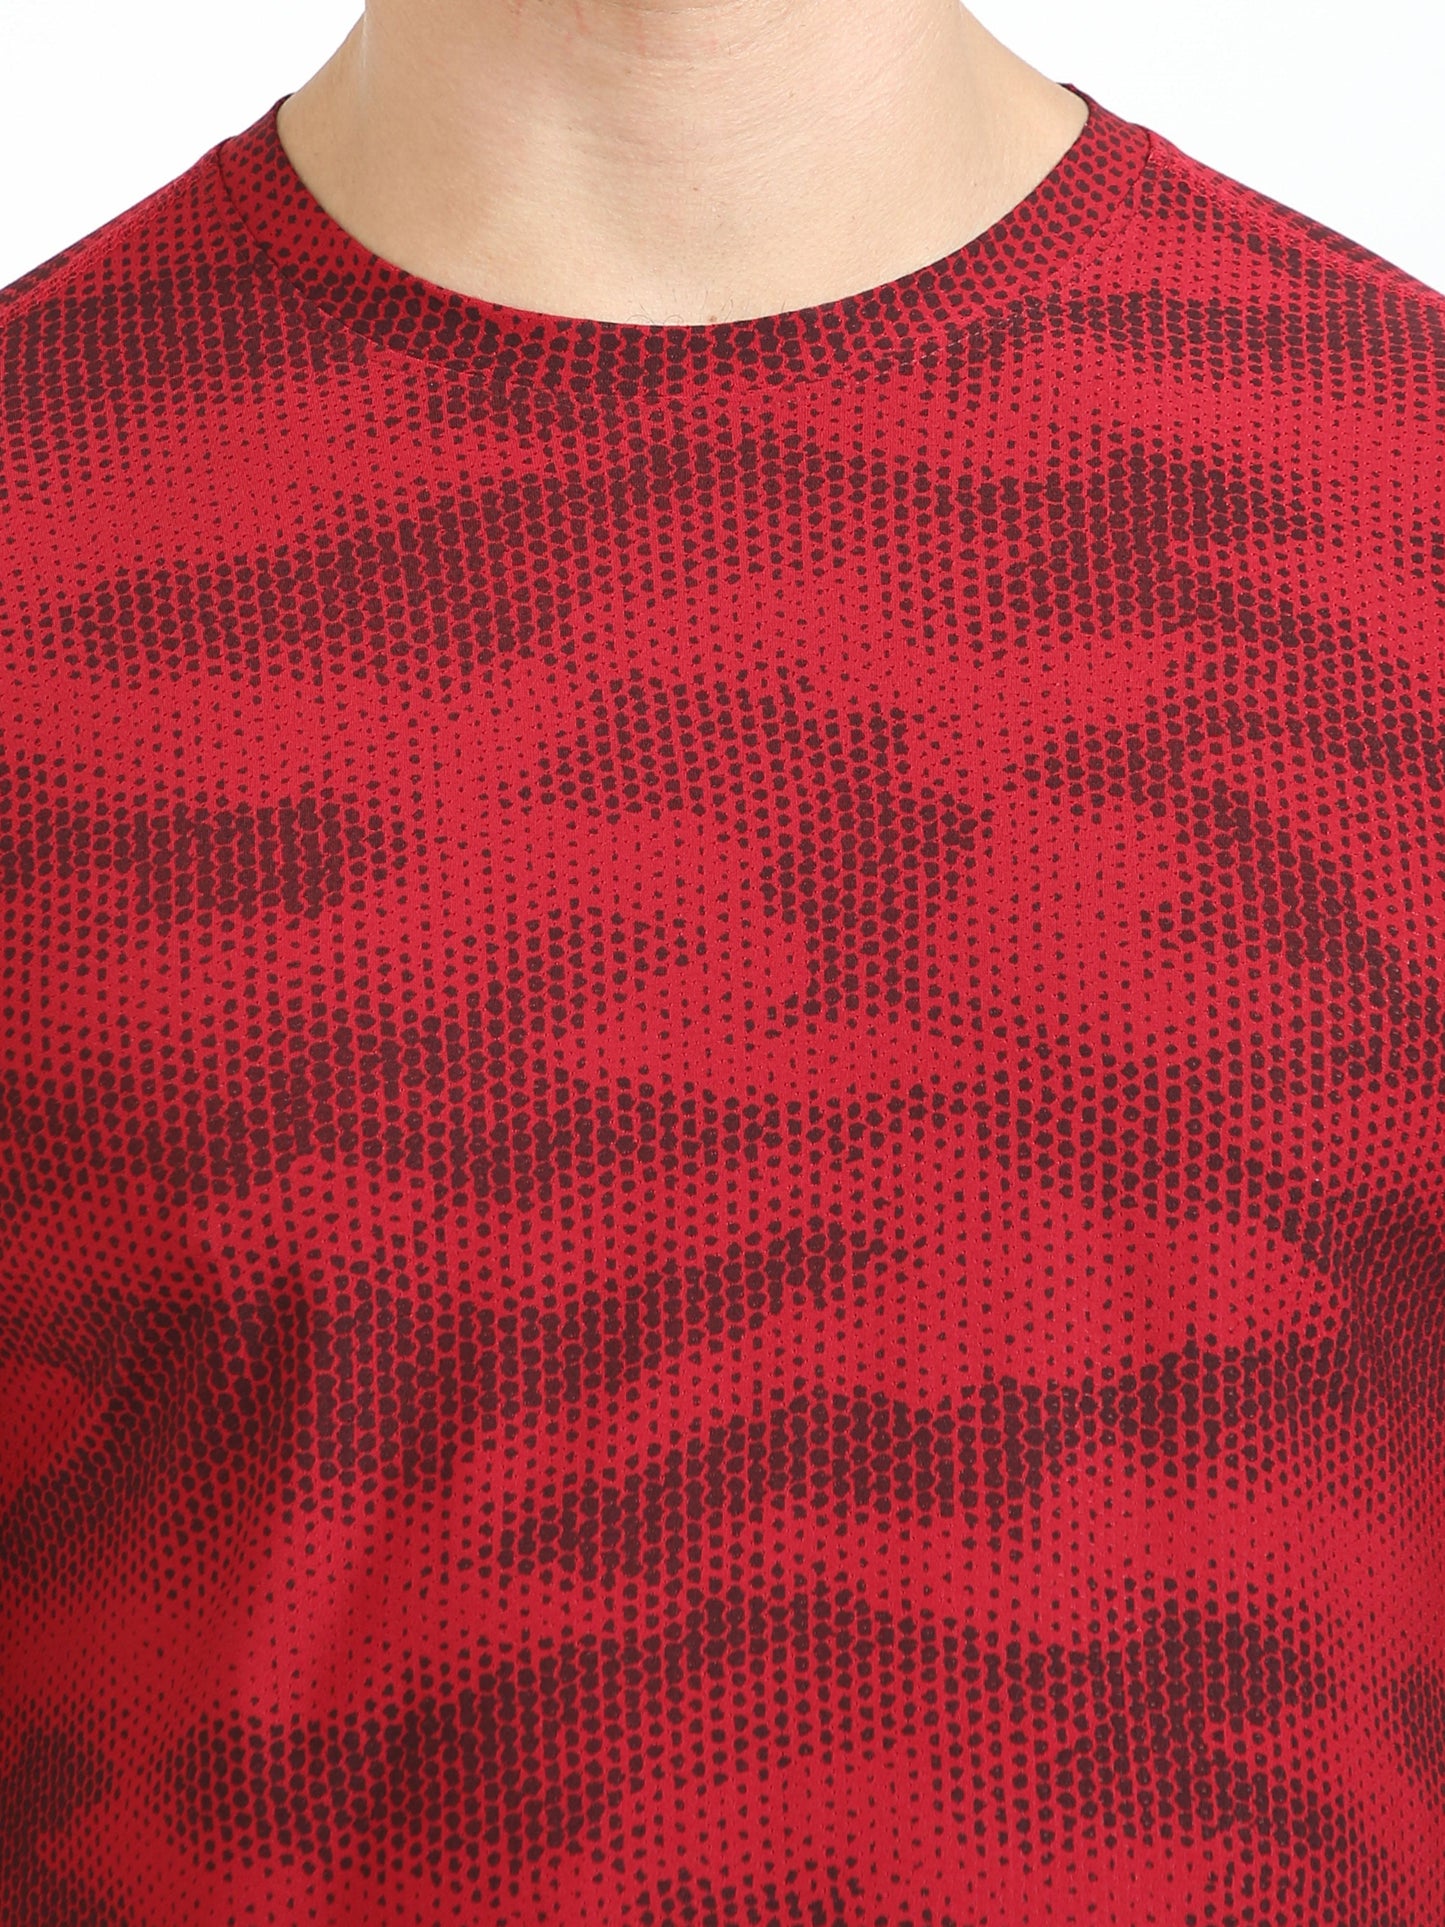 Cornell Red Sports Tee